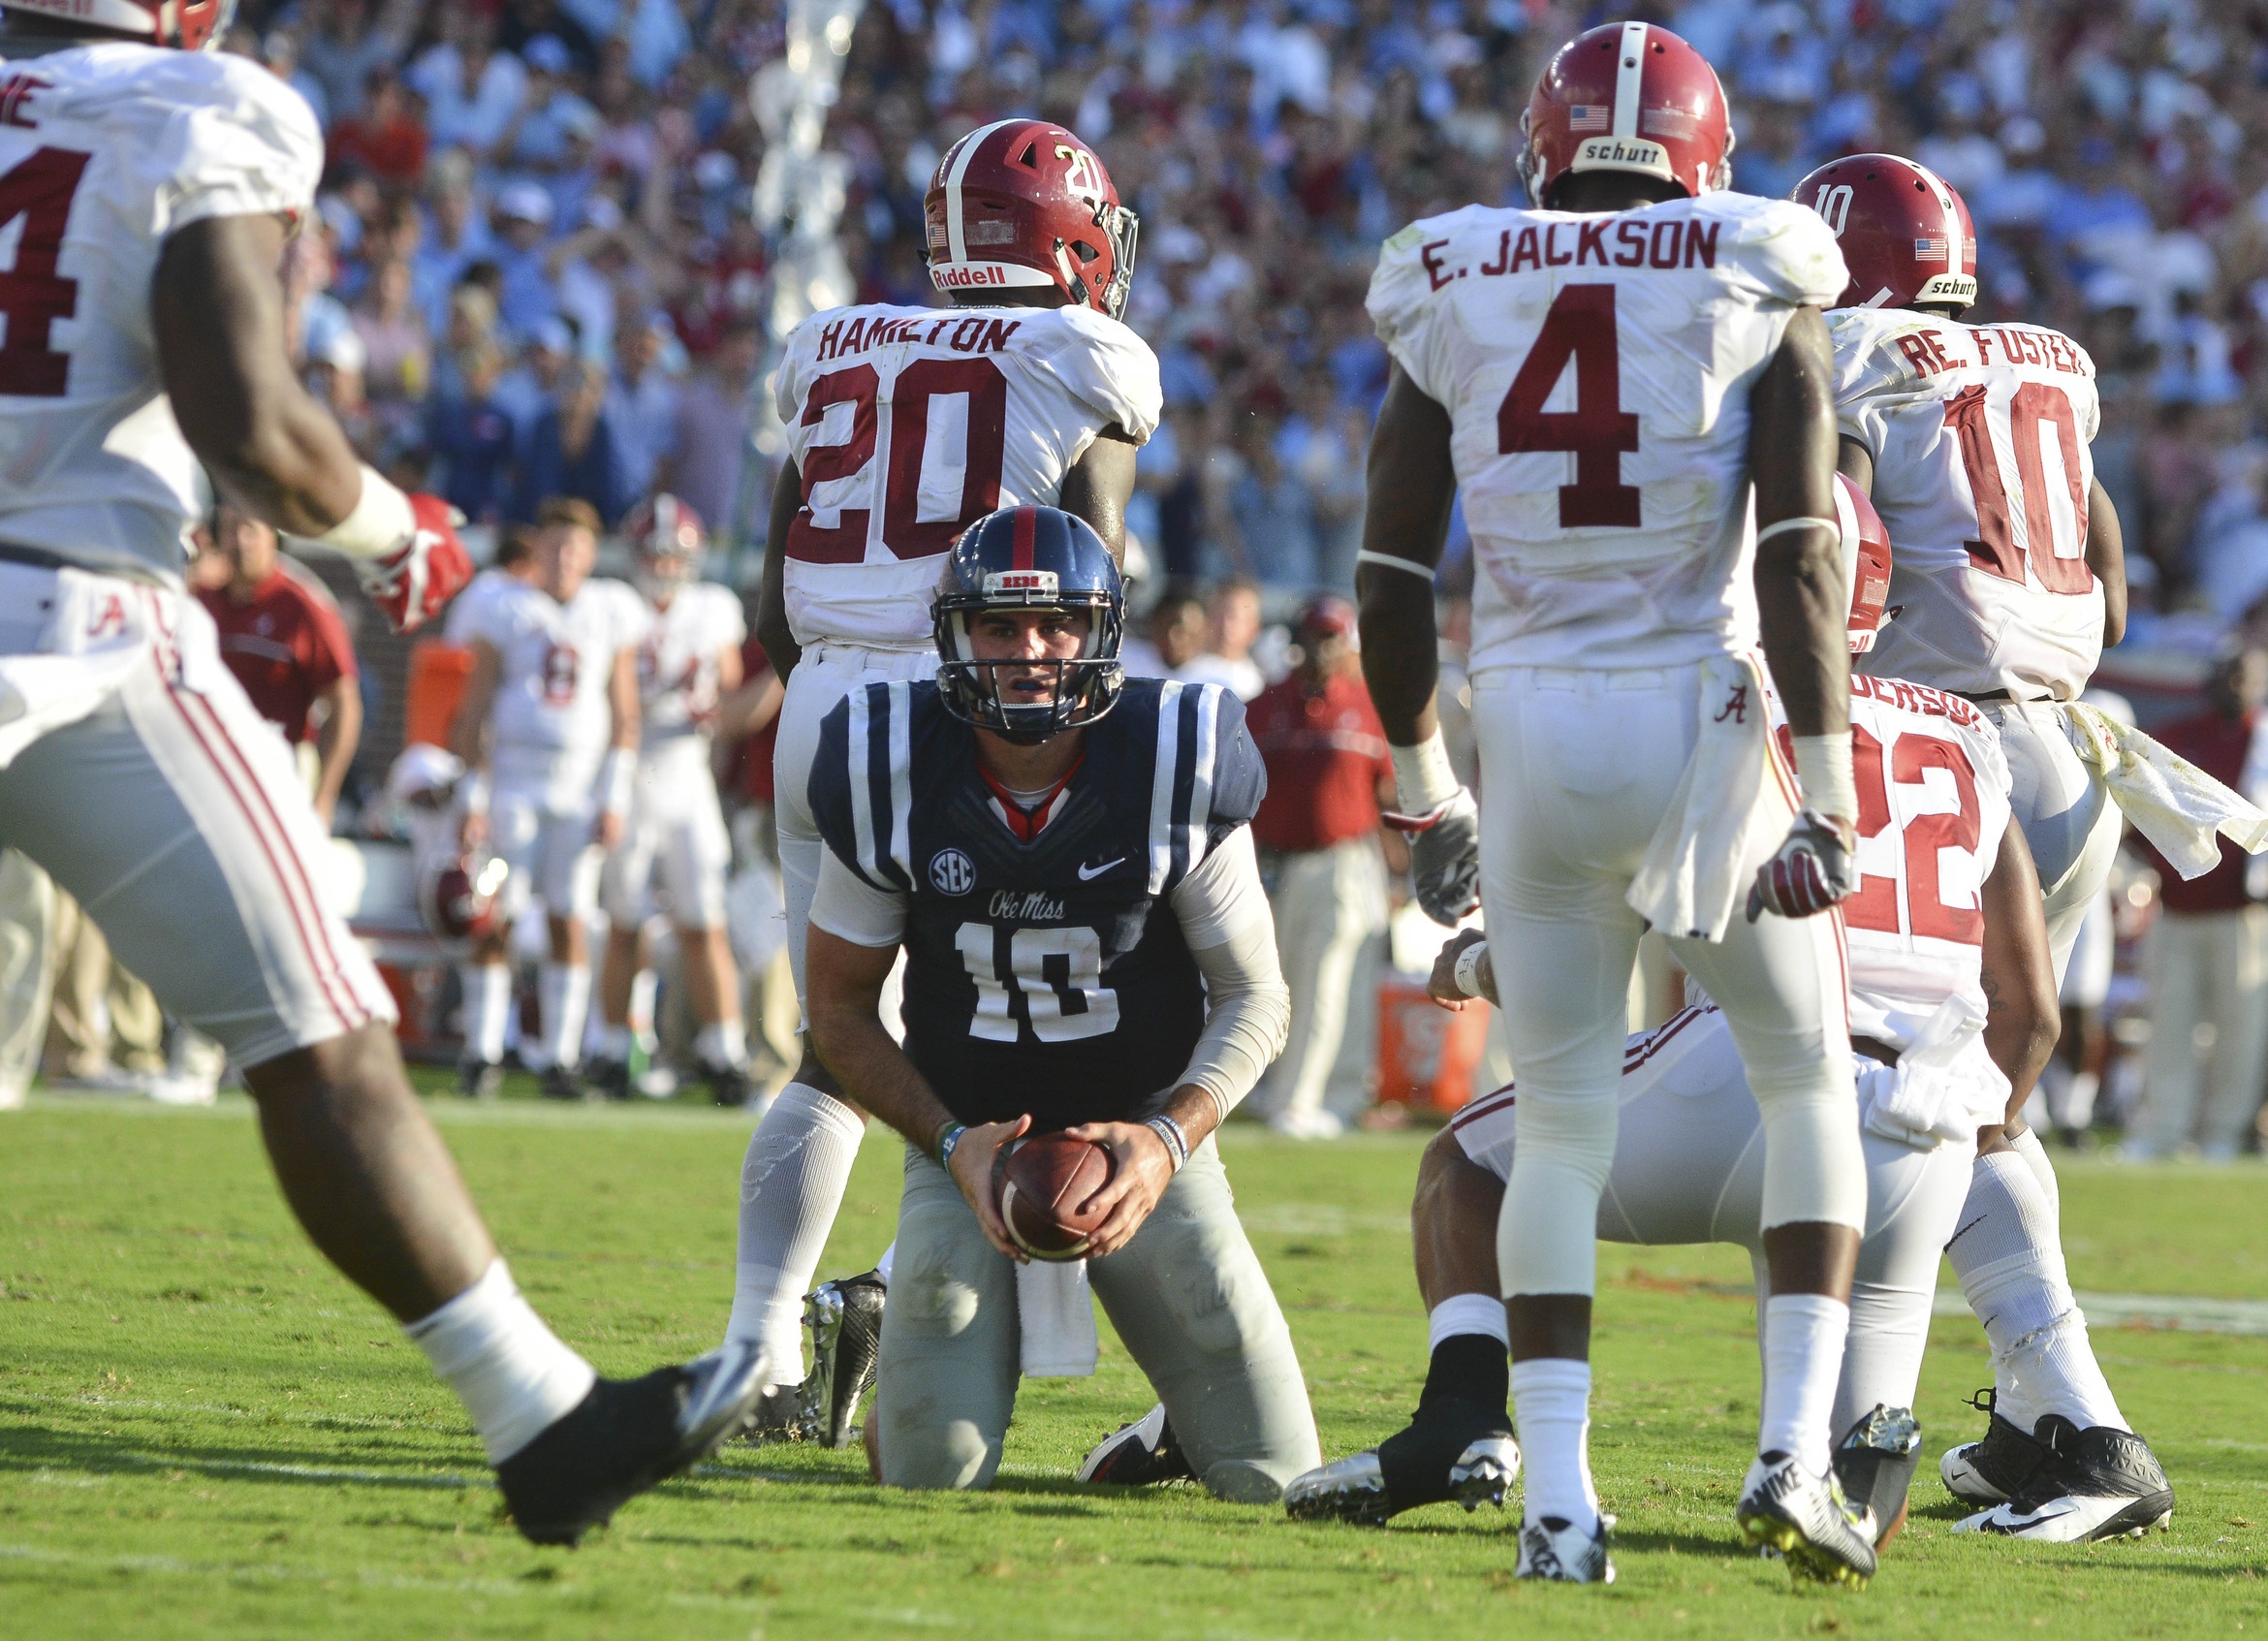 Sep 17, 2016; Oxford, MS, USA; Mississippi Rebels quarterback Chad Kelly (10) reacts after being sacked near the end zone during the third quarter against the Alabama Crimson Tide at Vaught-Hemingway Stadium. Alabama won 48-43. Mandatory Credit: Matt Bush-USA TODAY Sports